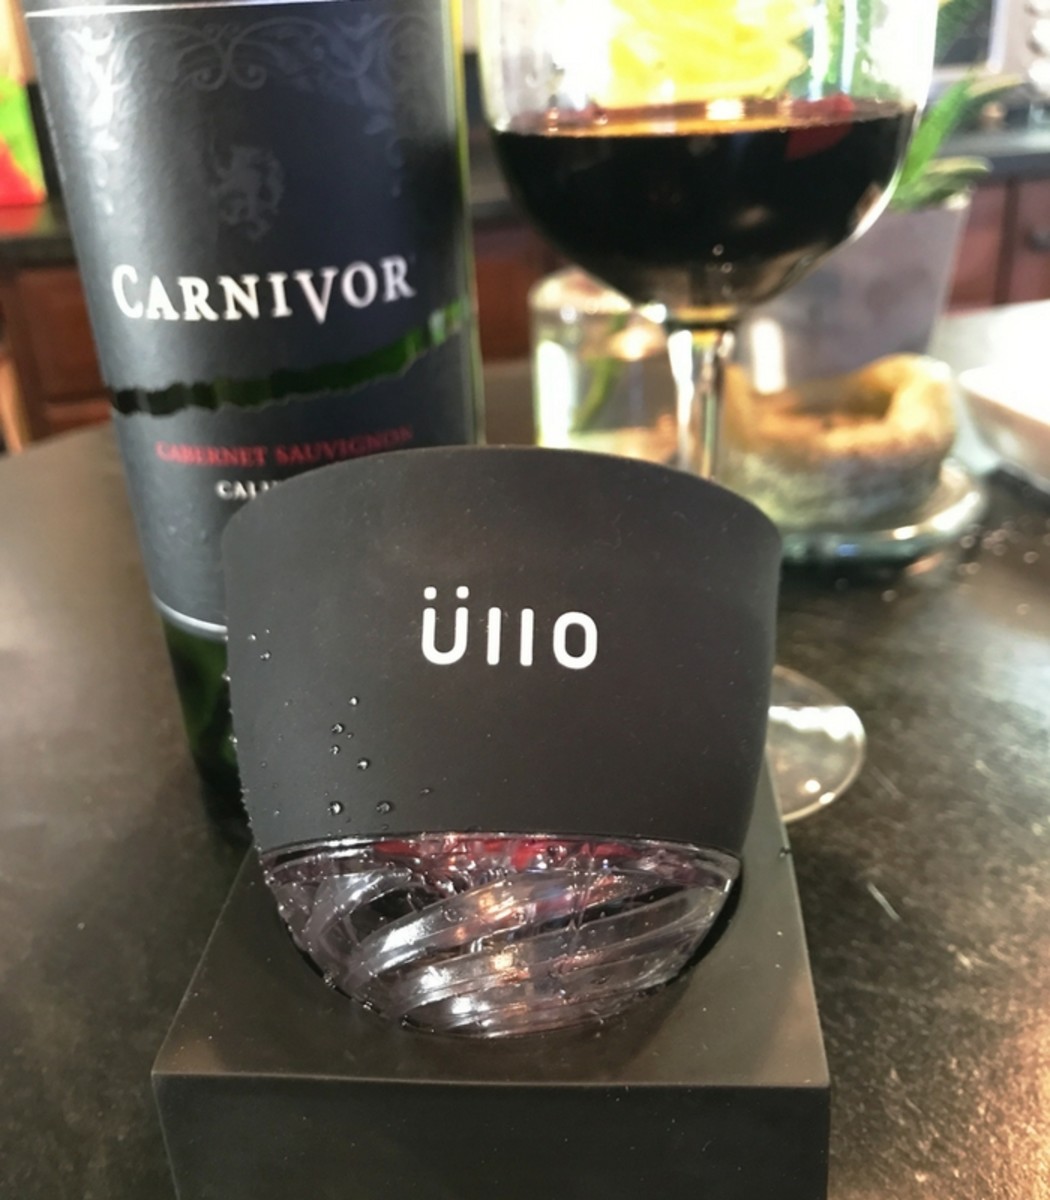 filter your wine with Ullo